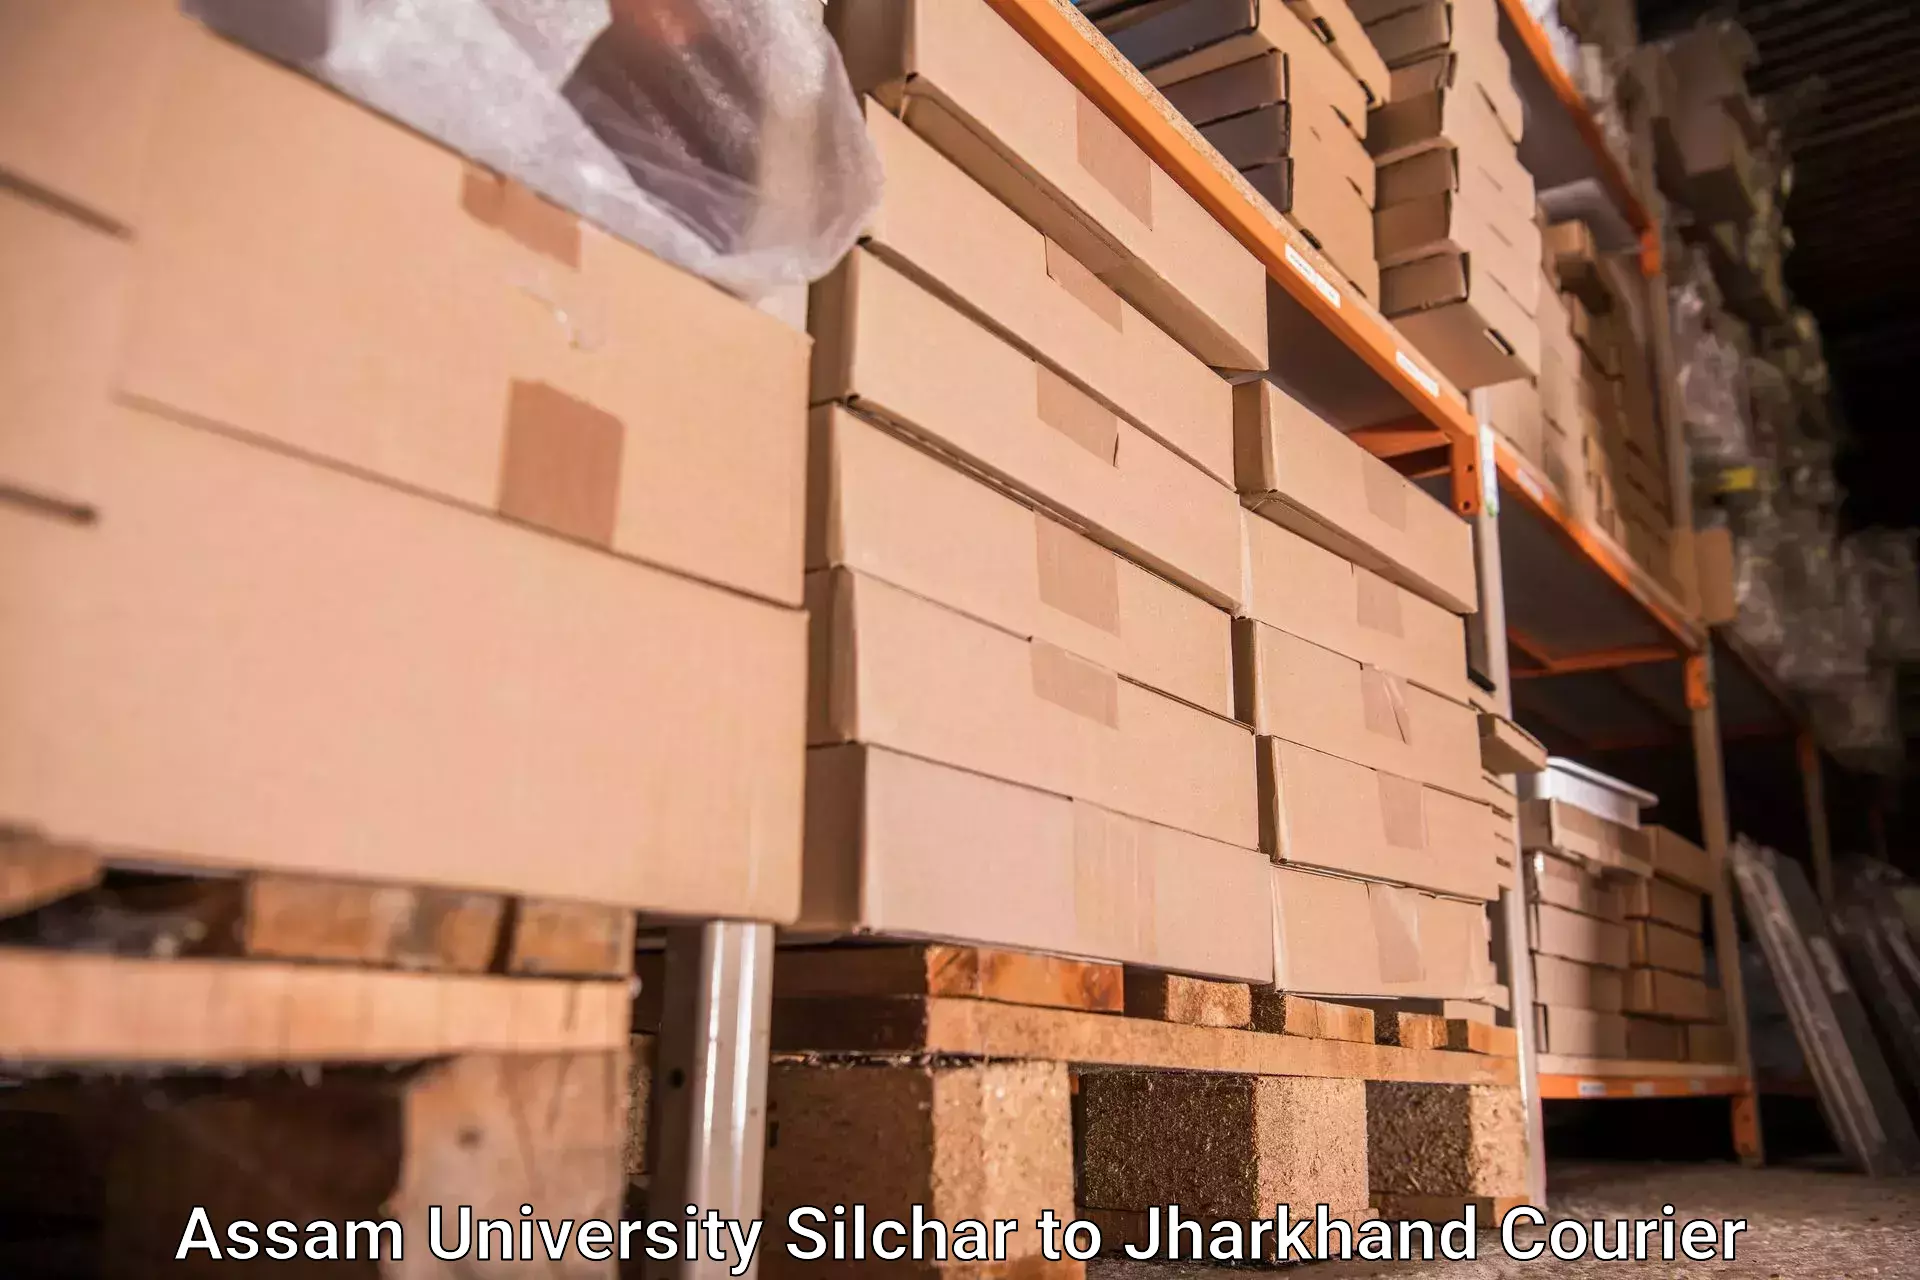 Baggage shipping experience Assam University Silchar to Boarijore